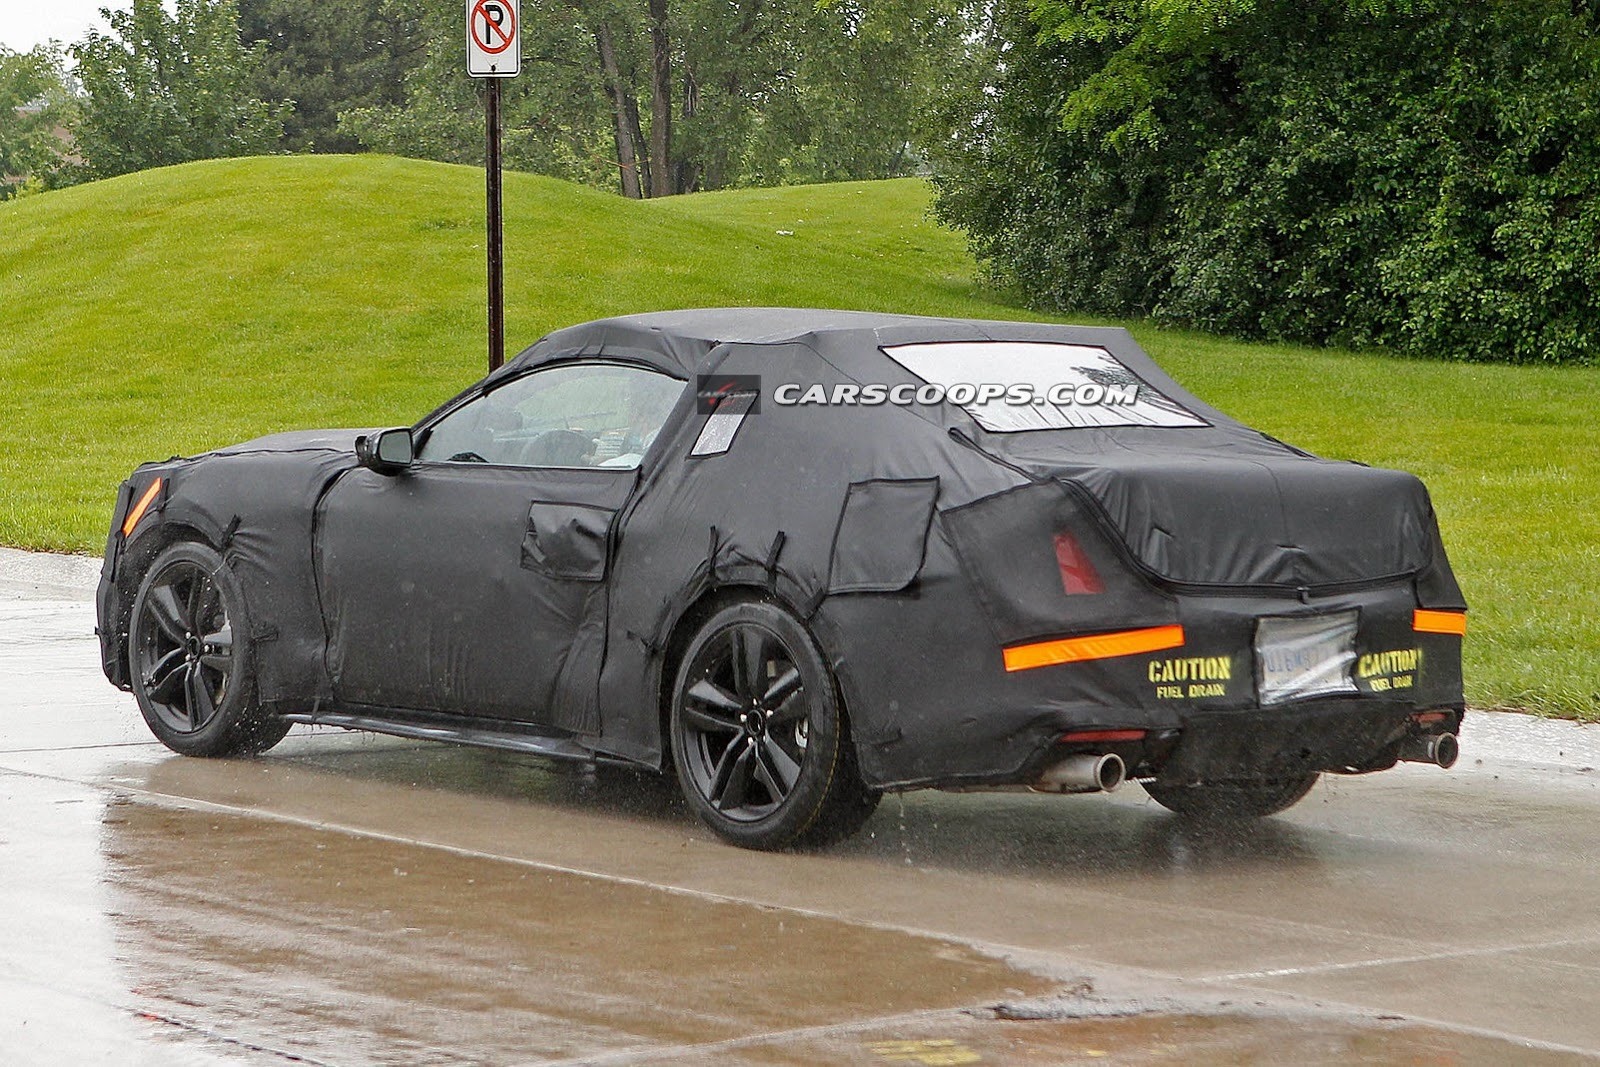 [2015-Ford-Mustang-Coupe-4Carscoops%255B3%255D%255B4%255D.jpg]